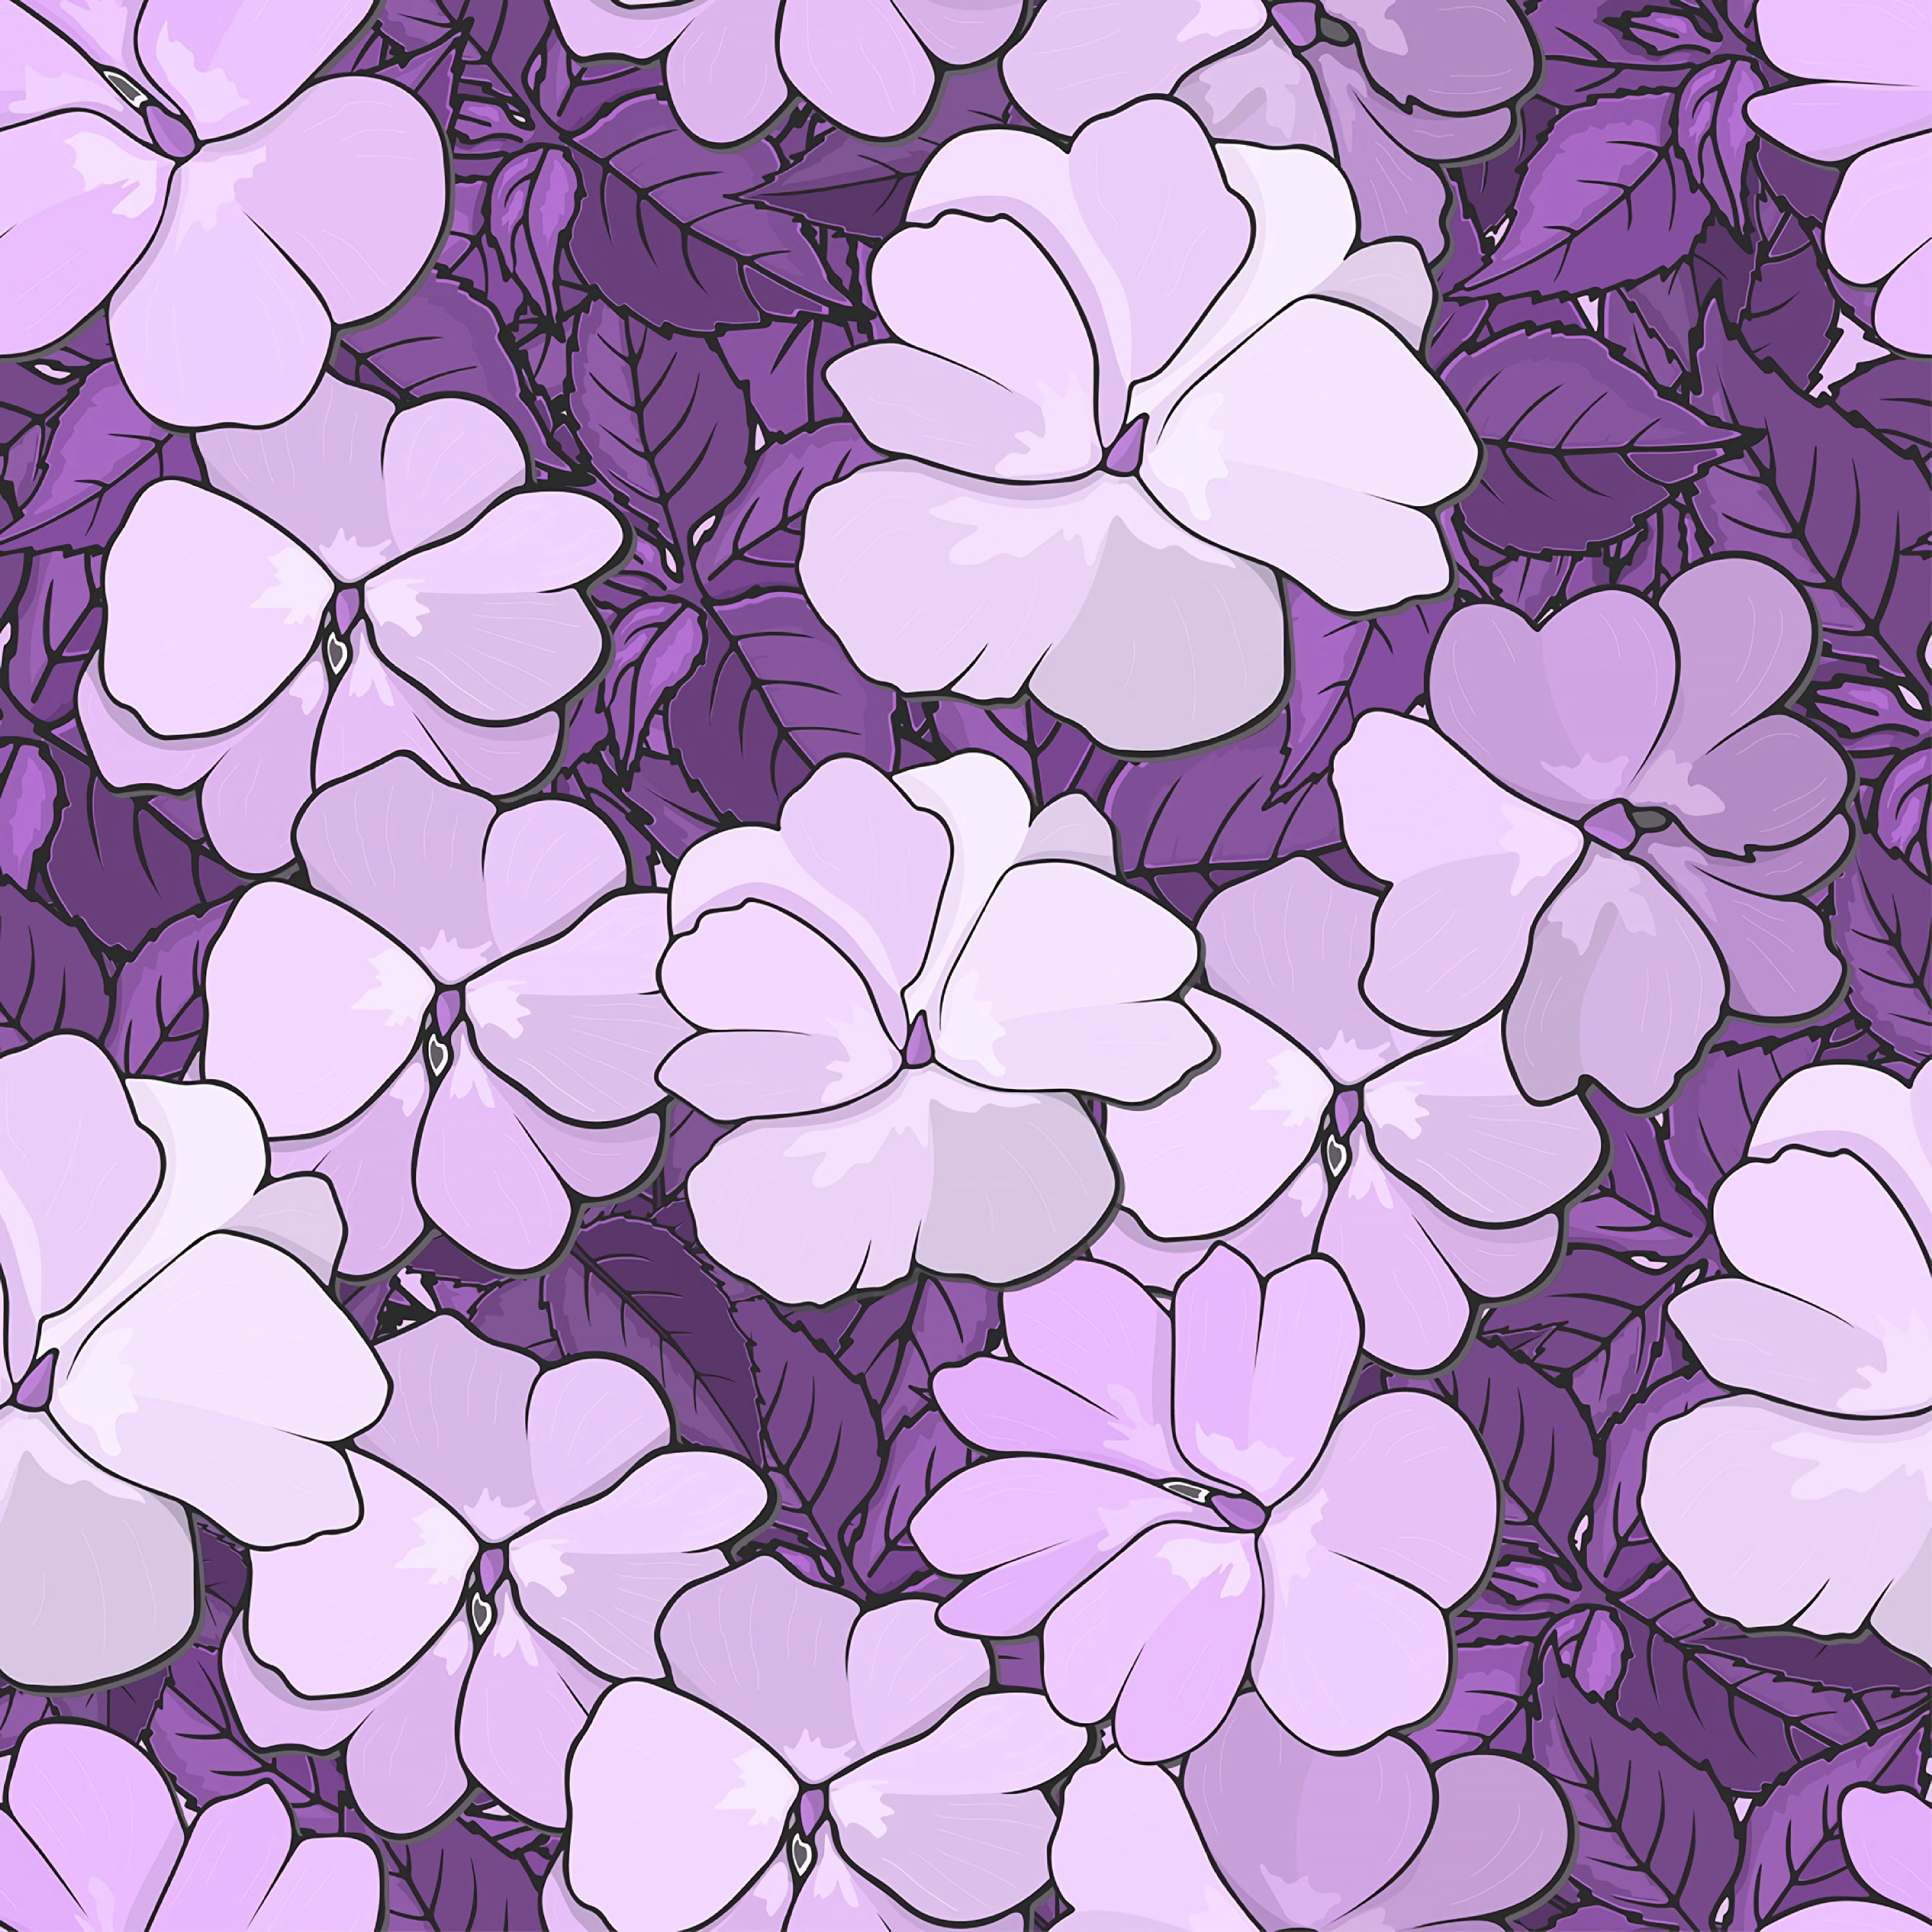 lilac, pattern, white, flowers, leaves, texture, textures, floral 1080p